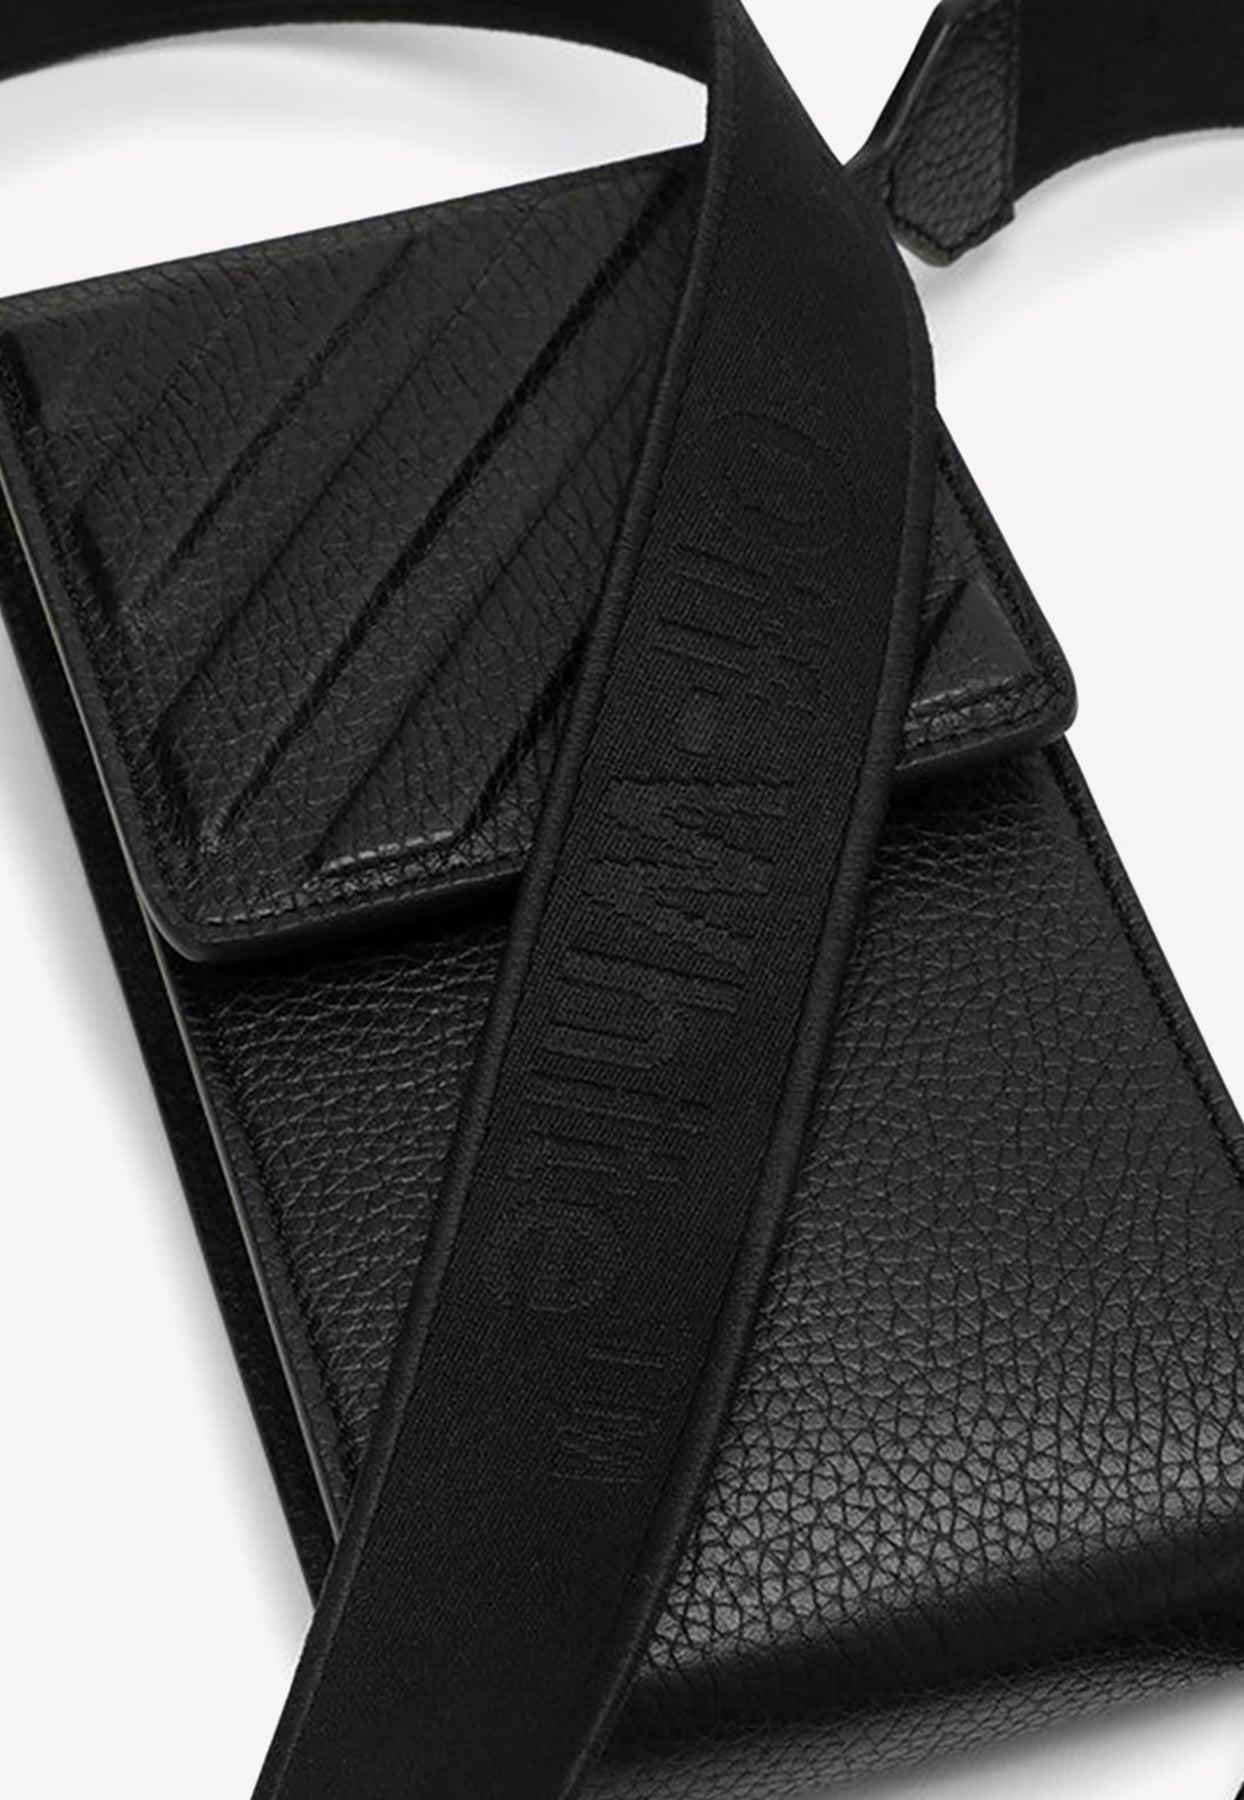 Off-White c/o Virgil Abloh Leather Phone Holder With Strap in